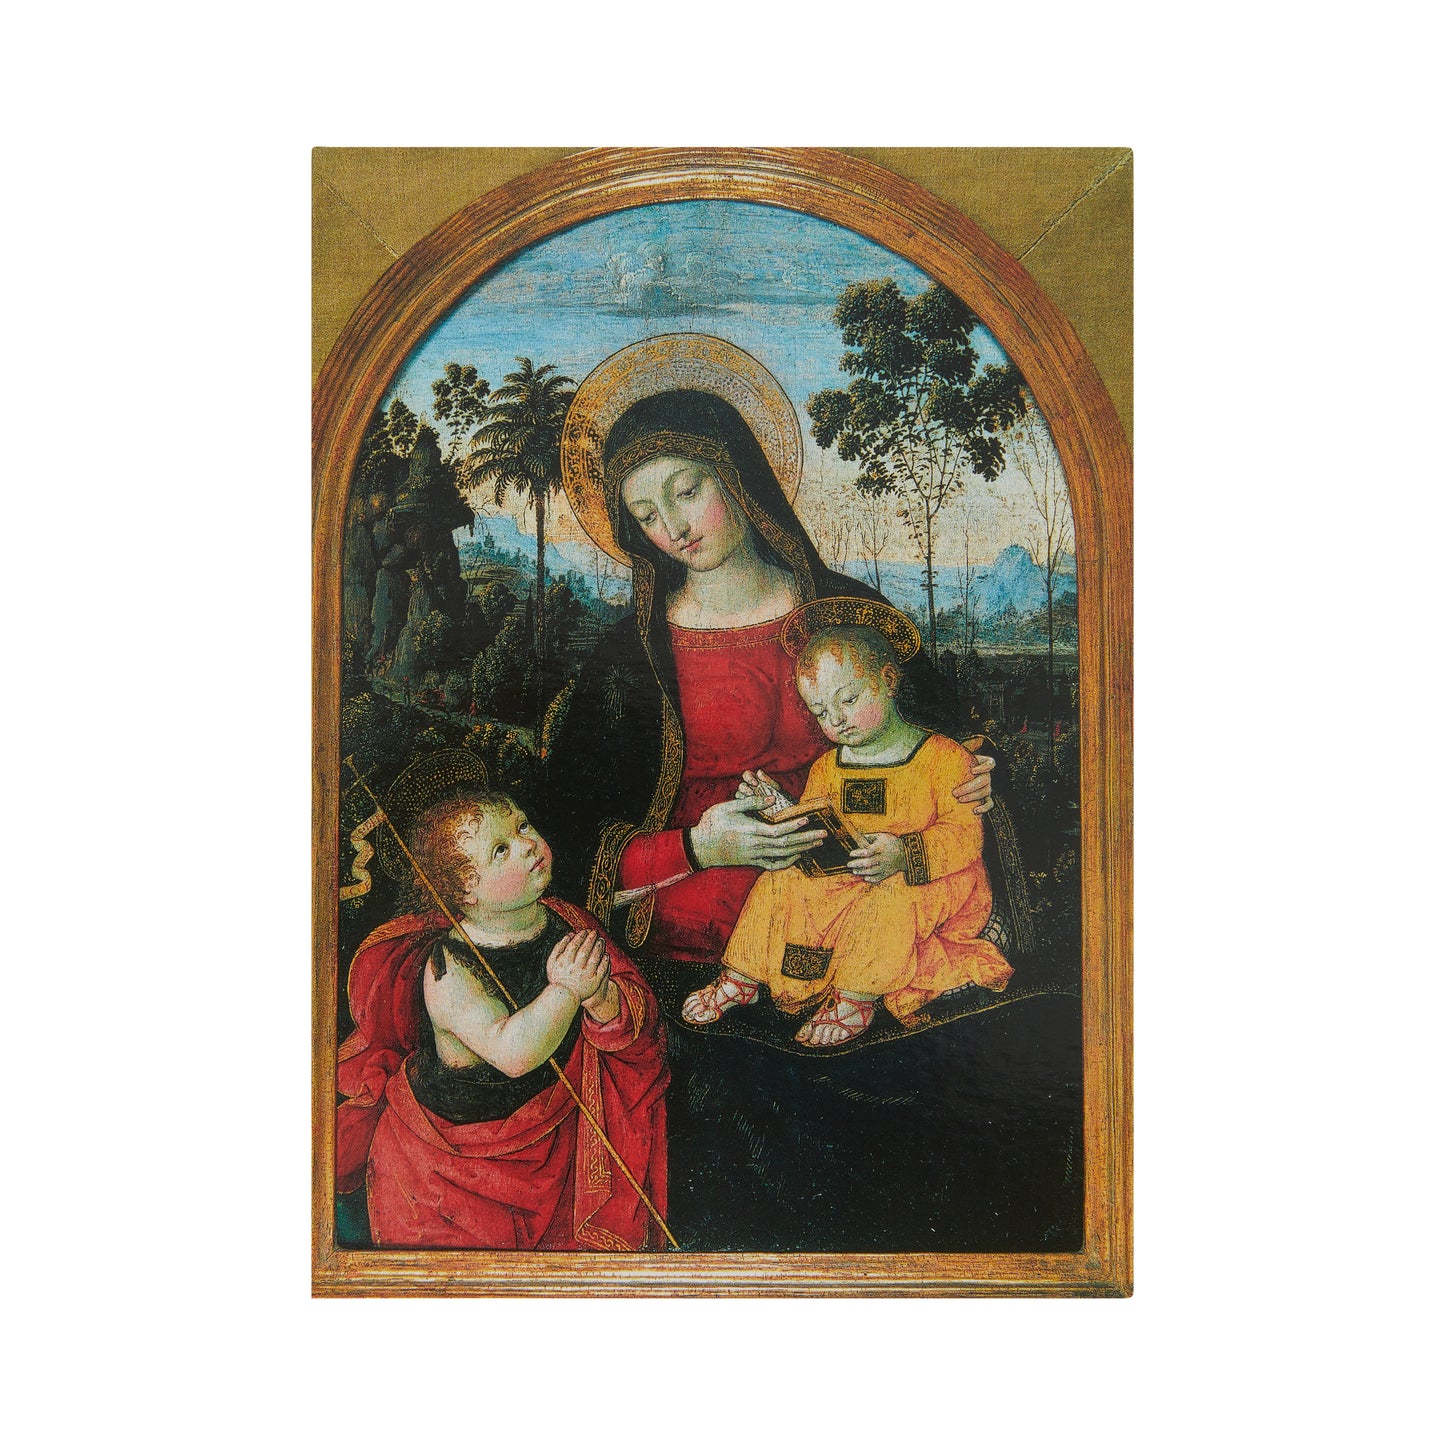 Portrait format Christmas card, Renaissance scene of the Virgin and Child with St John as a young boy. From the collection of The Fitzwilliam Museum. 